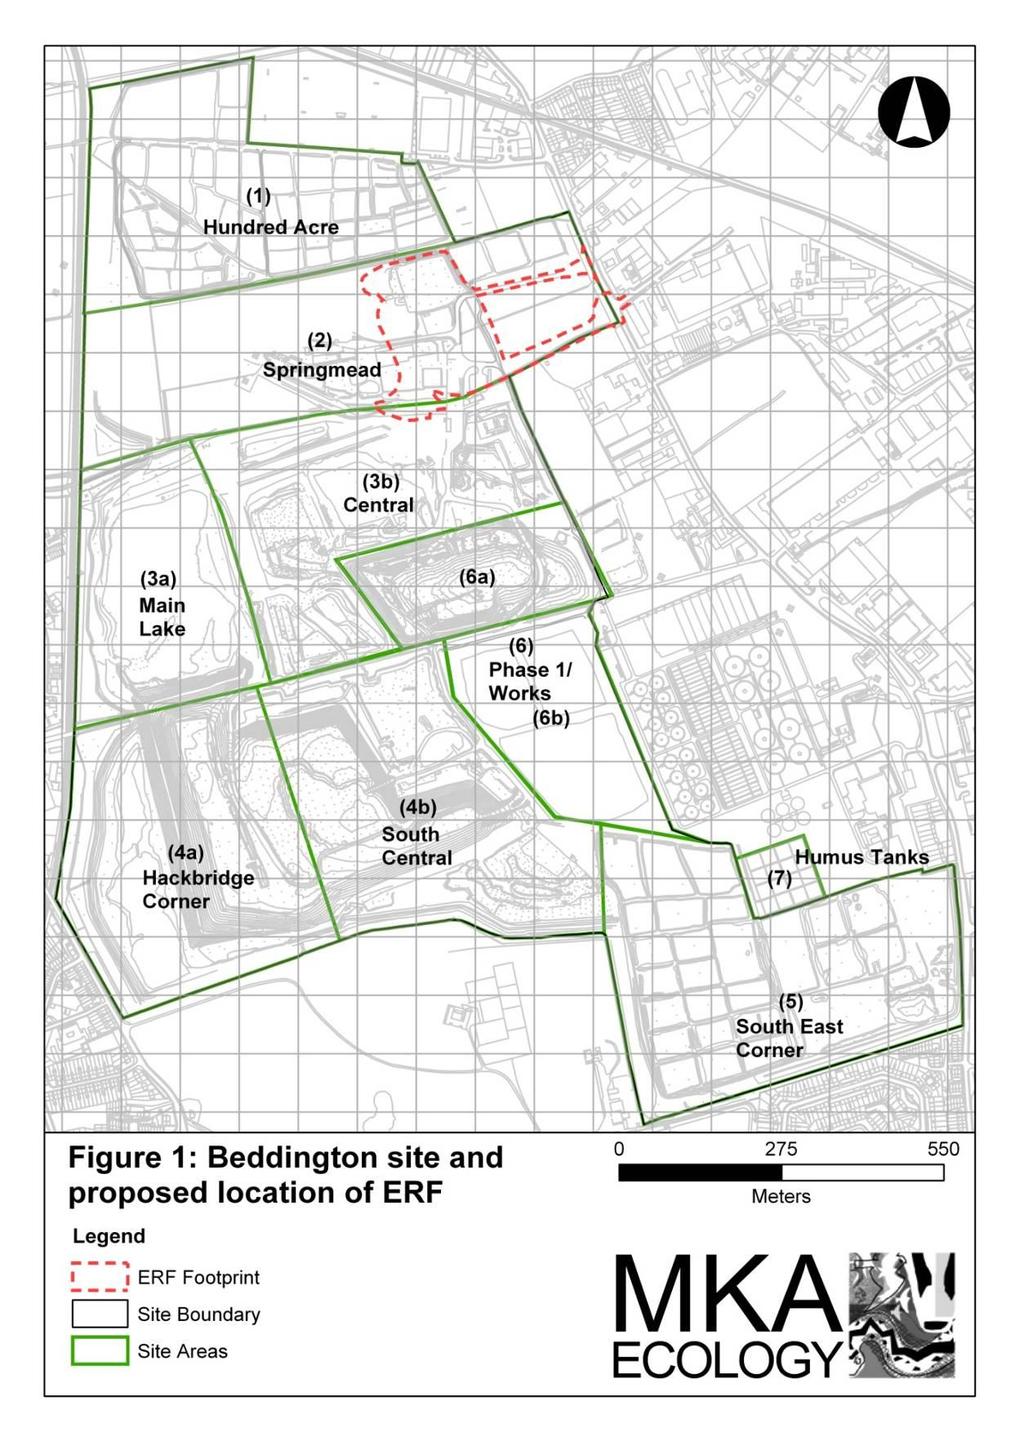 Figure 1: Map showing the Beddington site and compartments therein